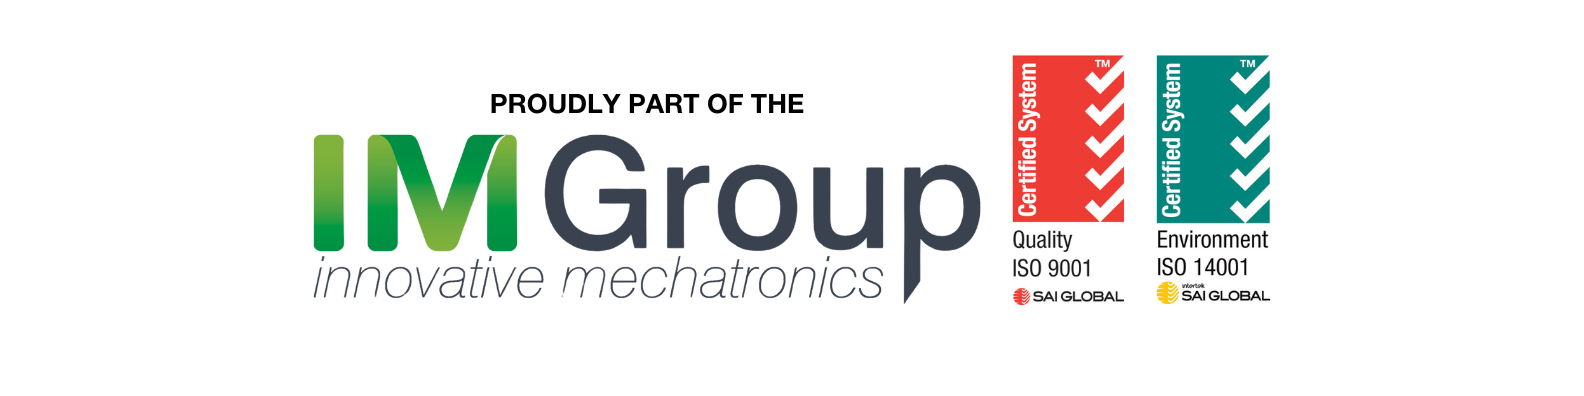 Proudly Part of the Innovative Mechatronics Group